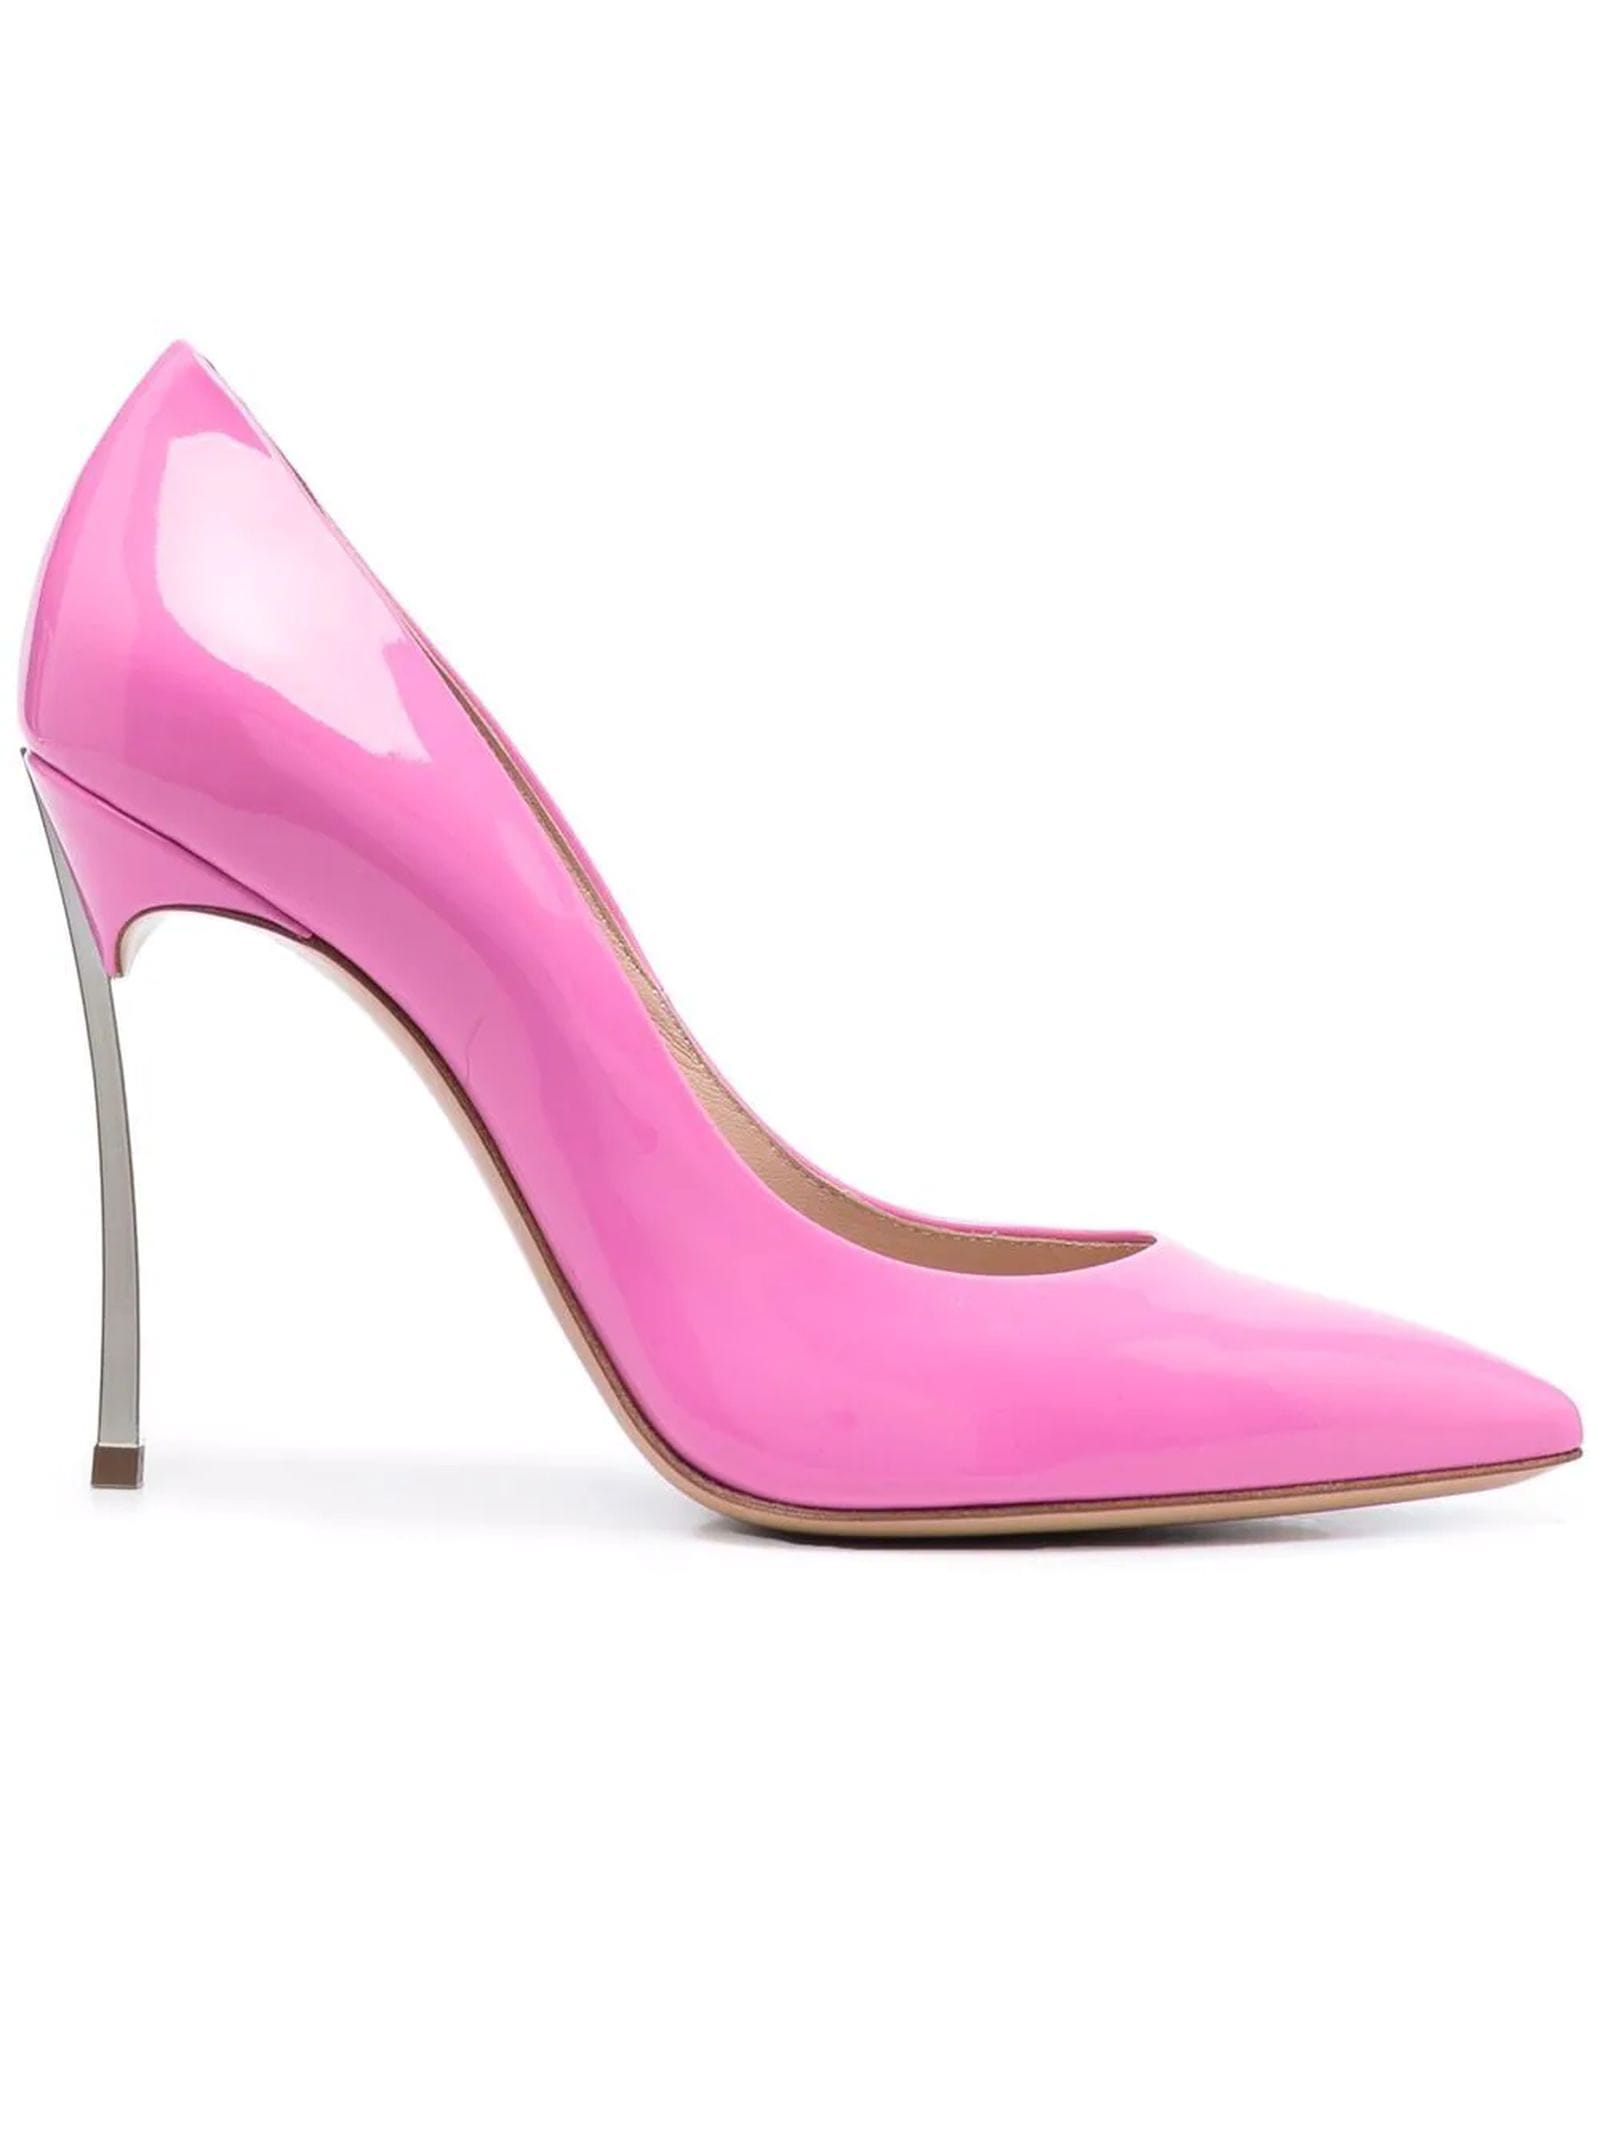 Casadei Pink Patent Leather Blade Pumps